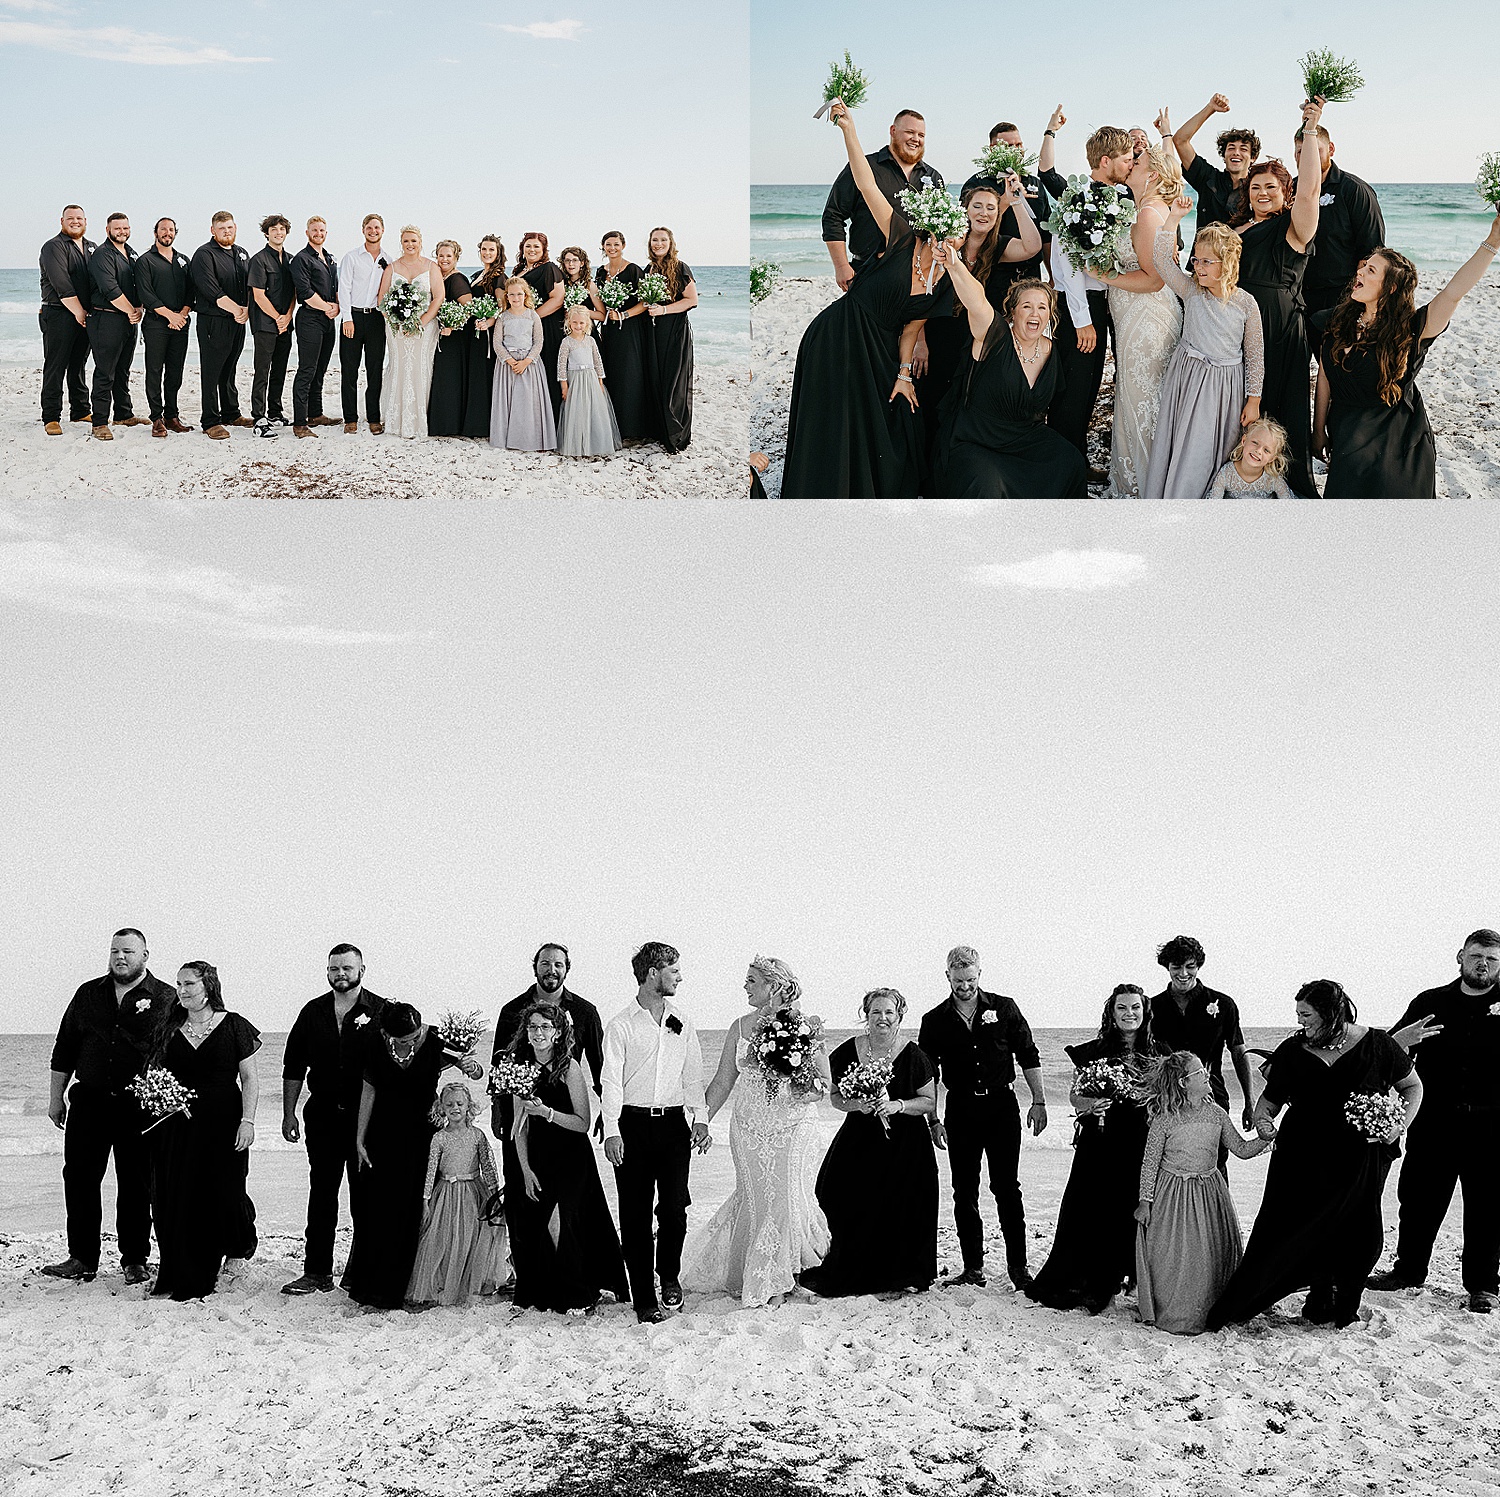 wedding party photos in all black dresses and suits holding bouquets